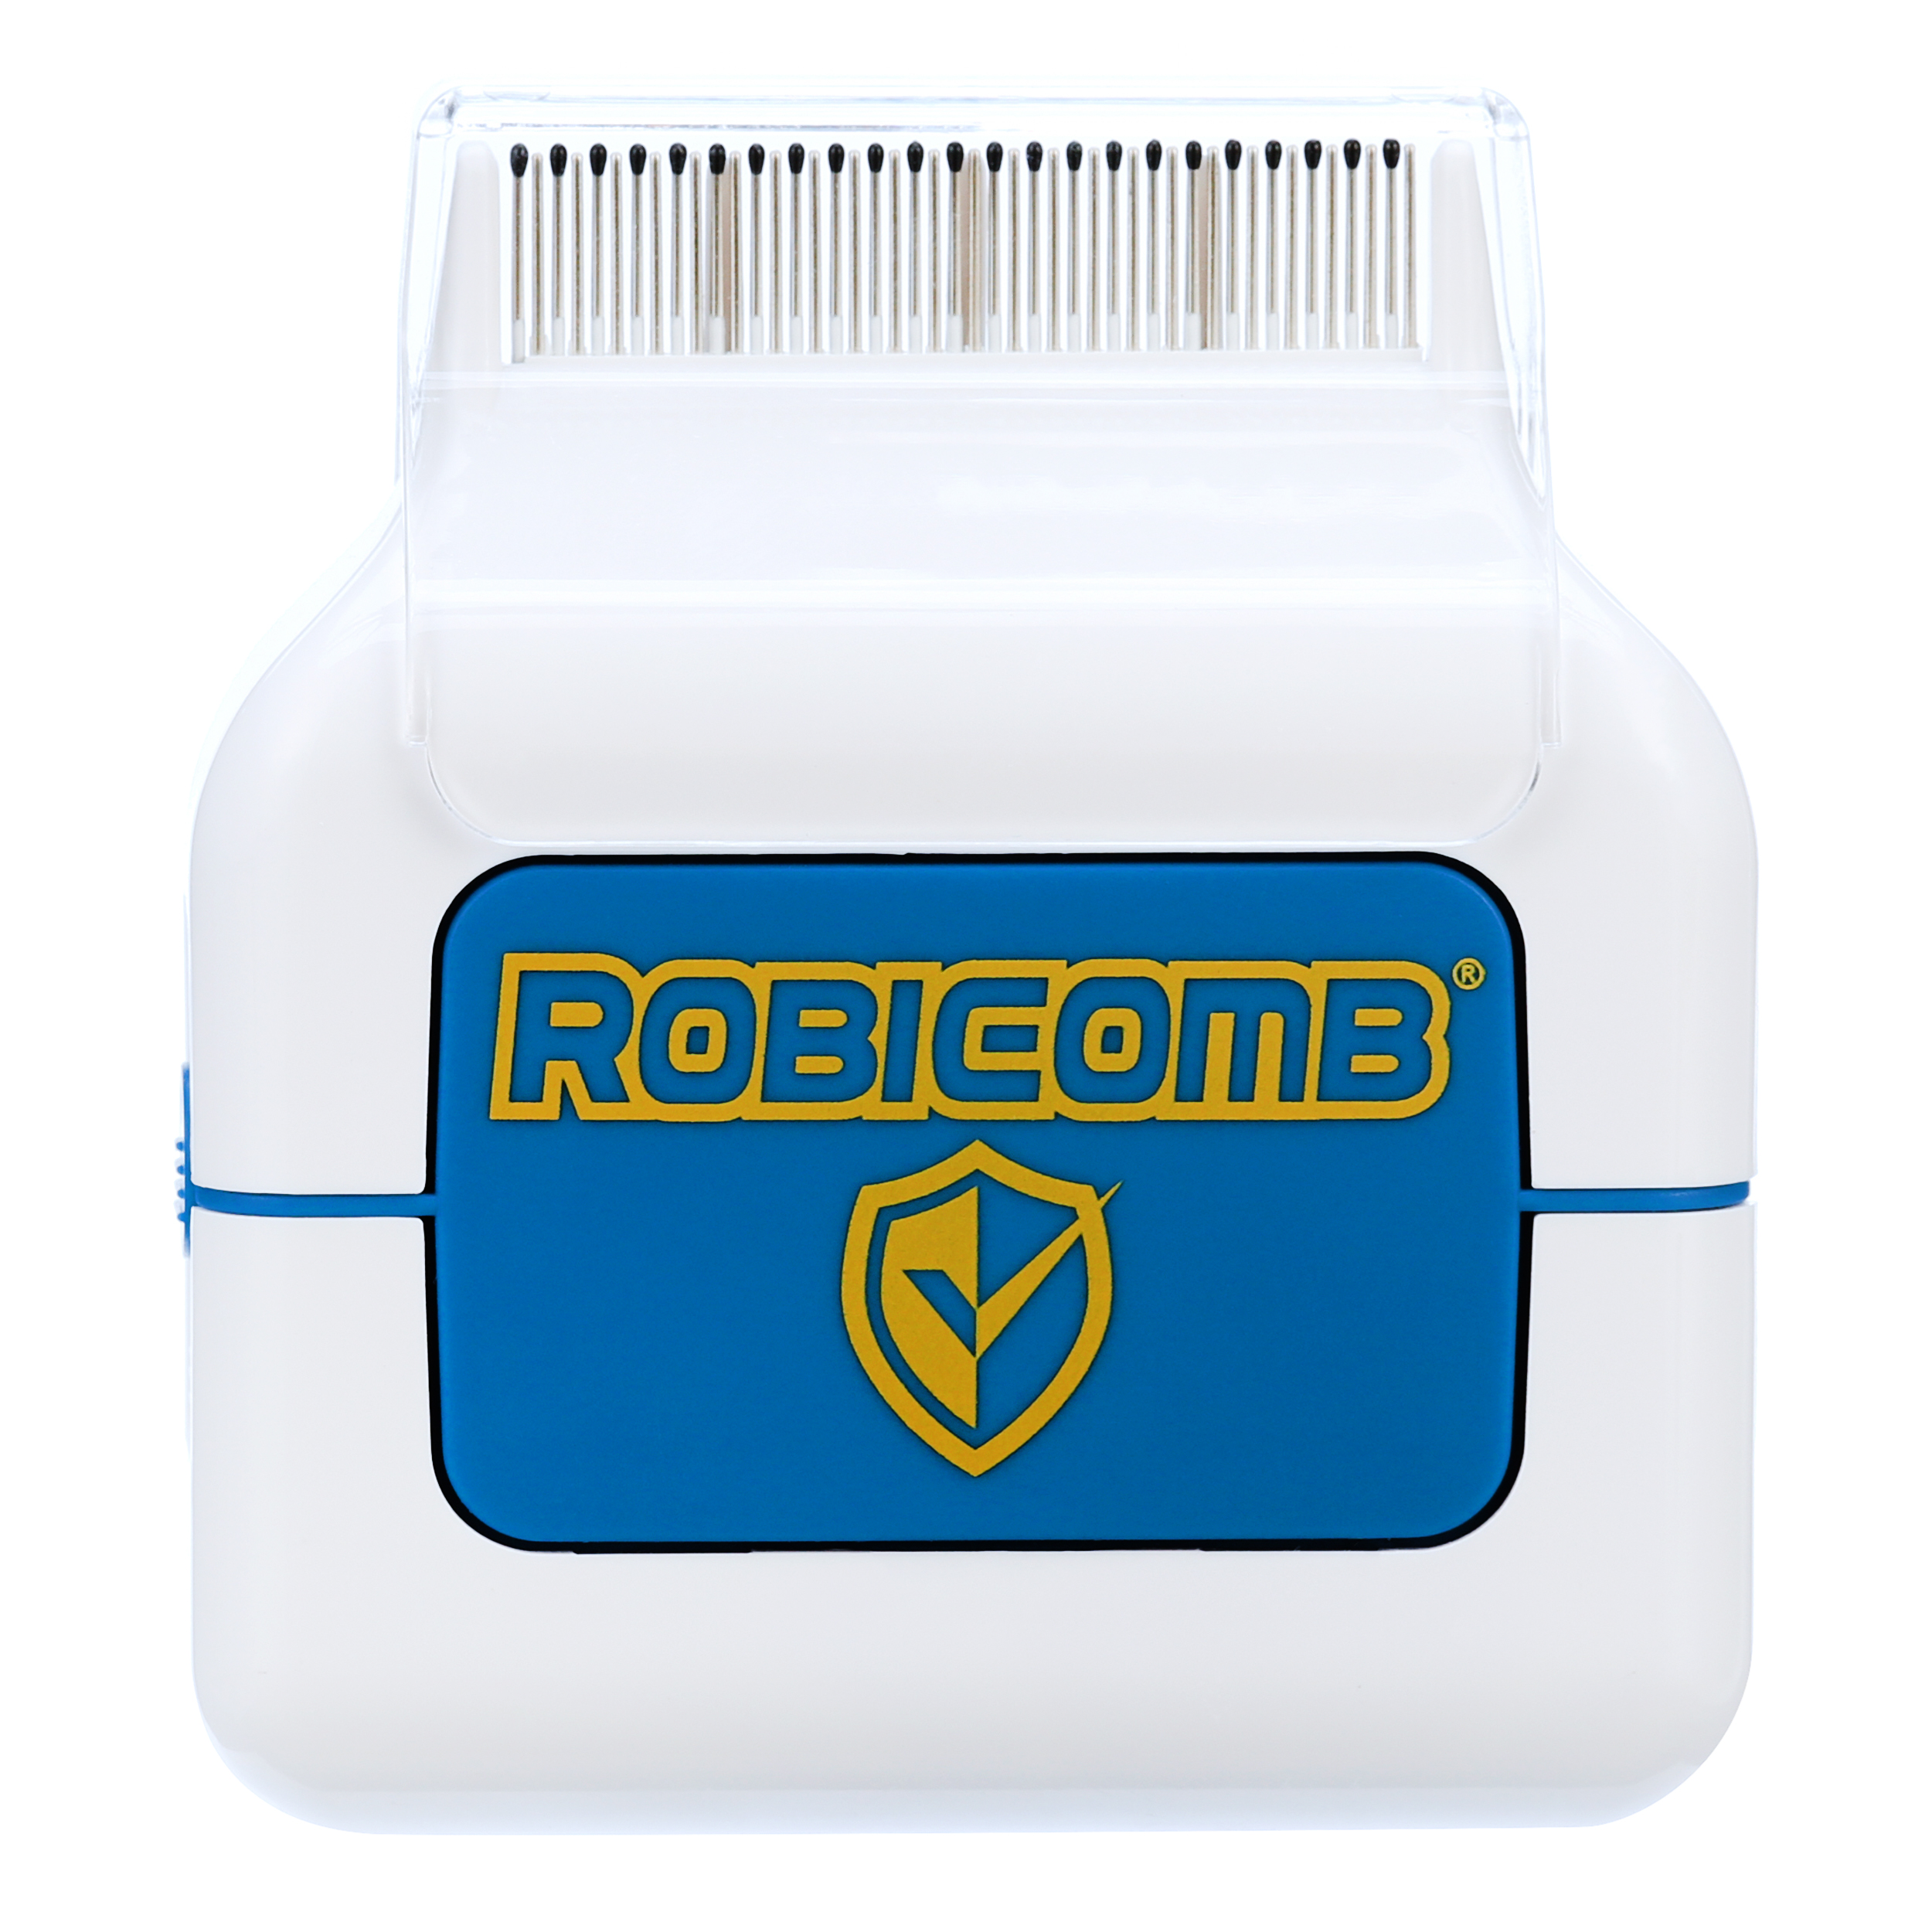 LiceGuard RobiComb Lice Zapping Comb - image 4 of 7